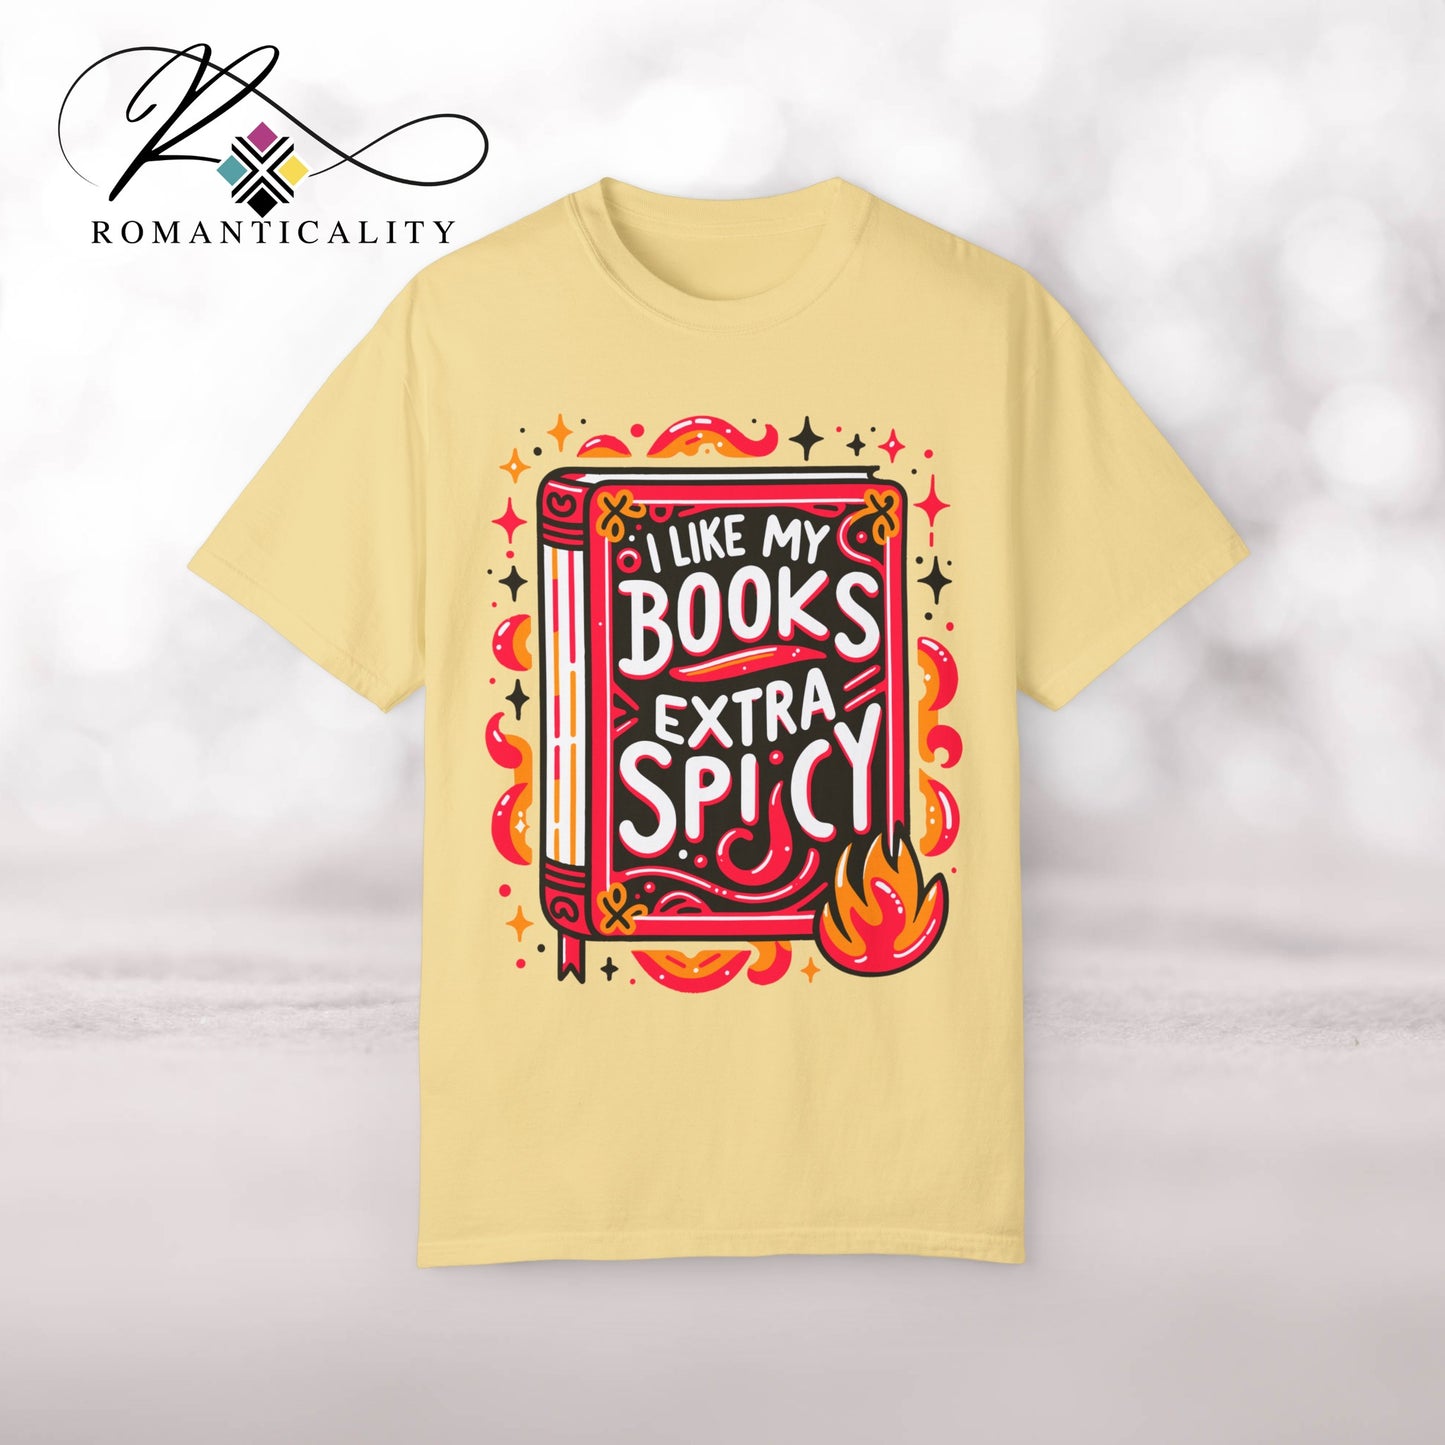 I Like My Books Spicy Graphic Reader Tee-Comfortable Book Lover T-Shirt-Gift for Readers/Writers